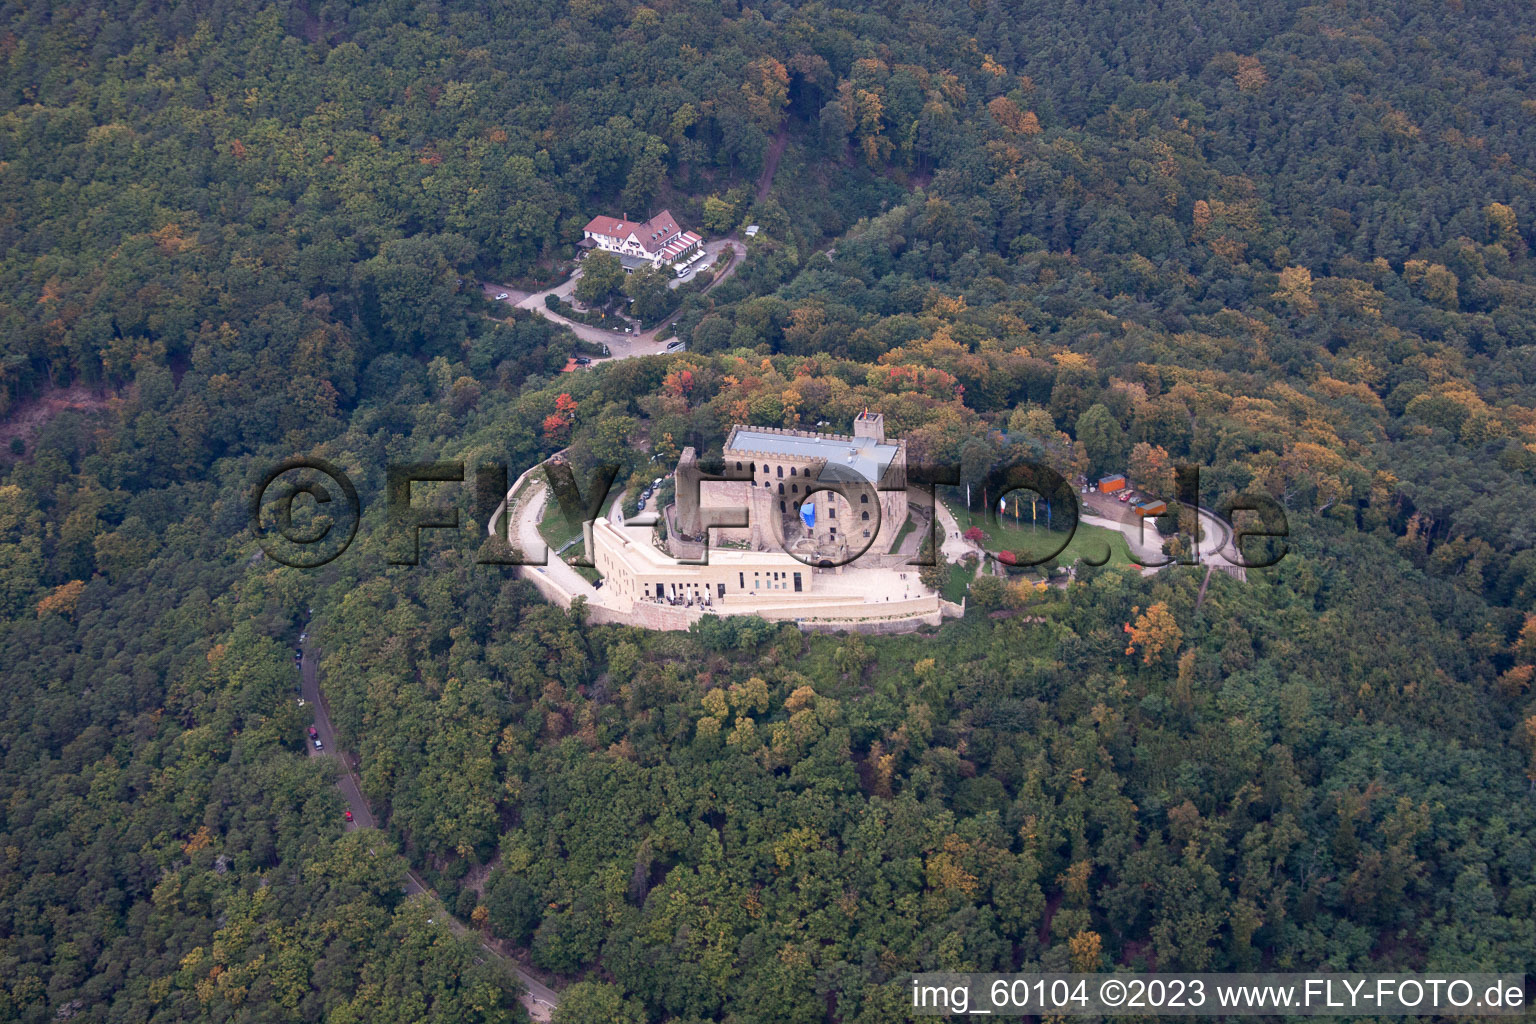 Drone image of Hambach Castle in the district Diedesfeld in Neustadt an der Weinstraße in the state Rhineland-Palatinate, Germany